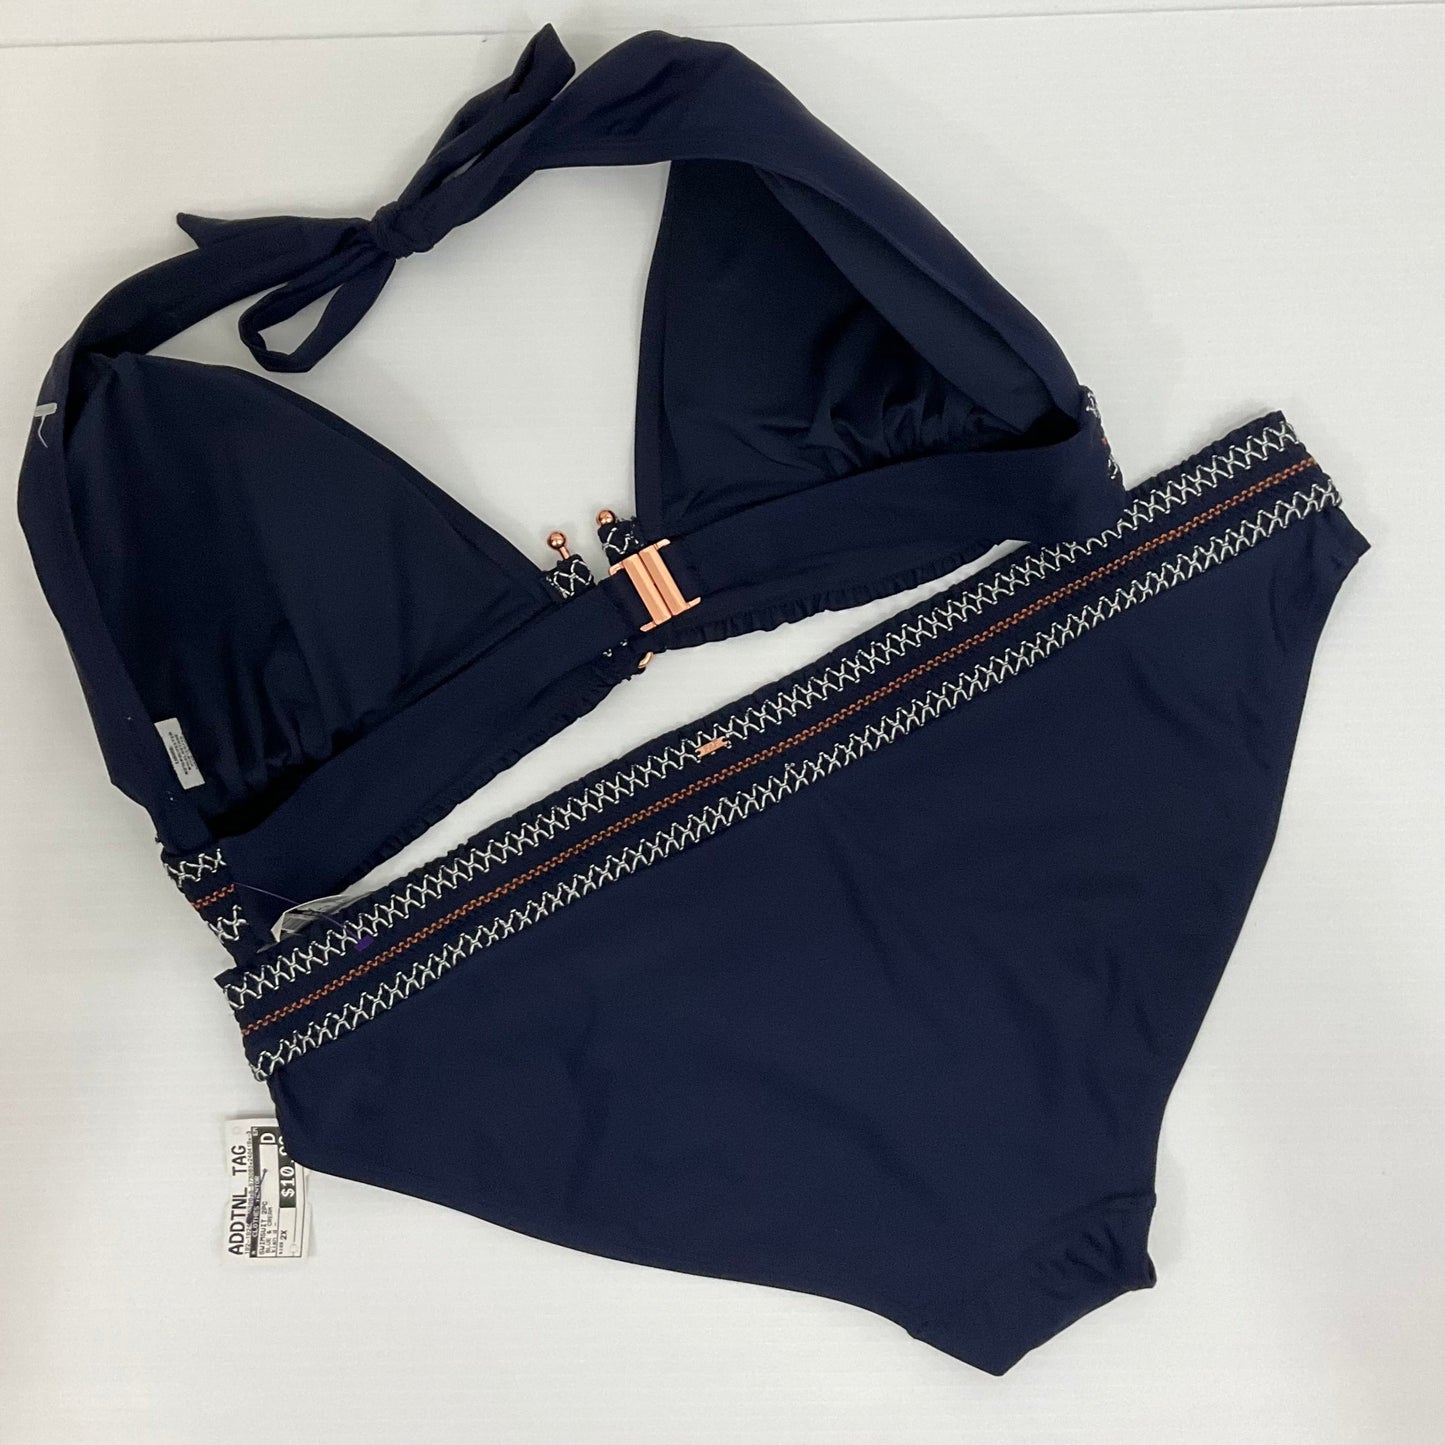 Swimsuit 2pc By Clothes Mentor  Size: 2x